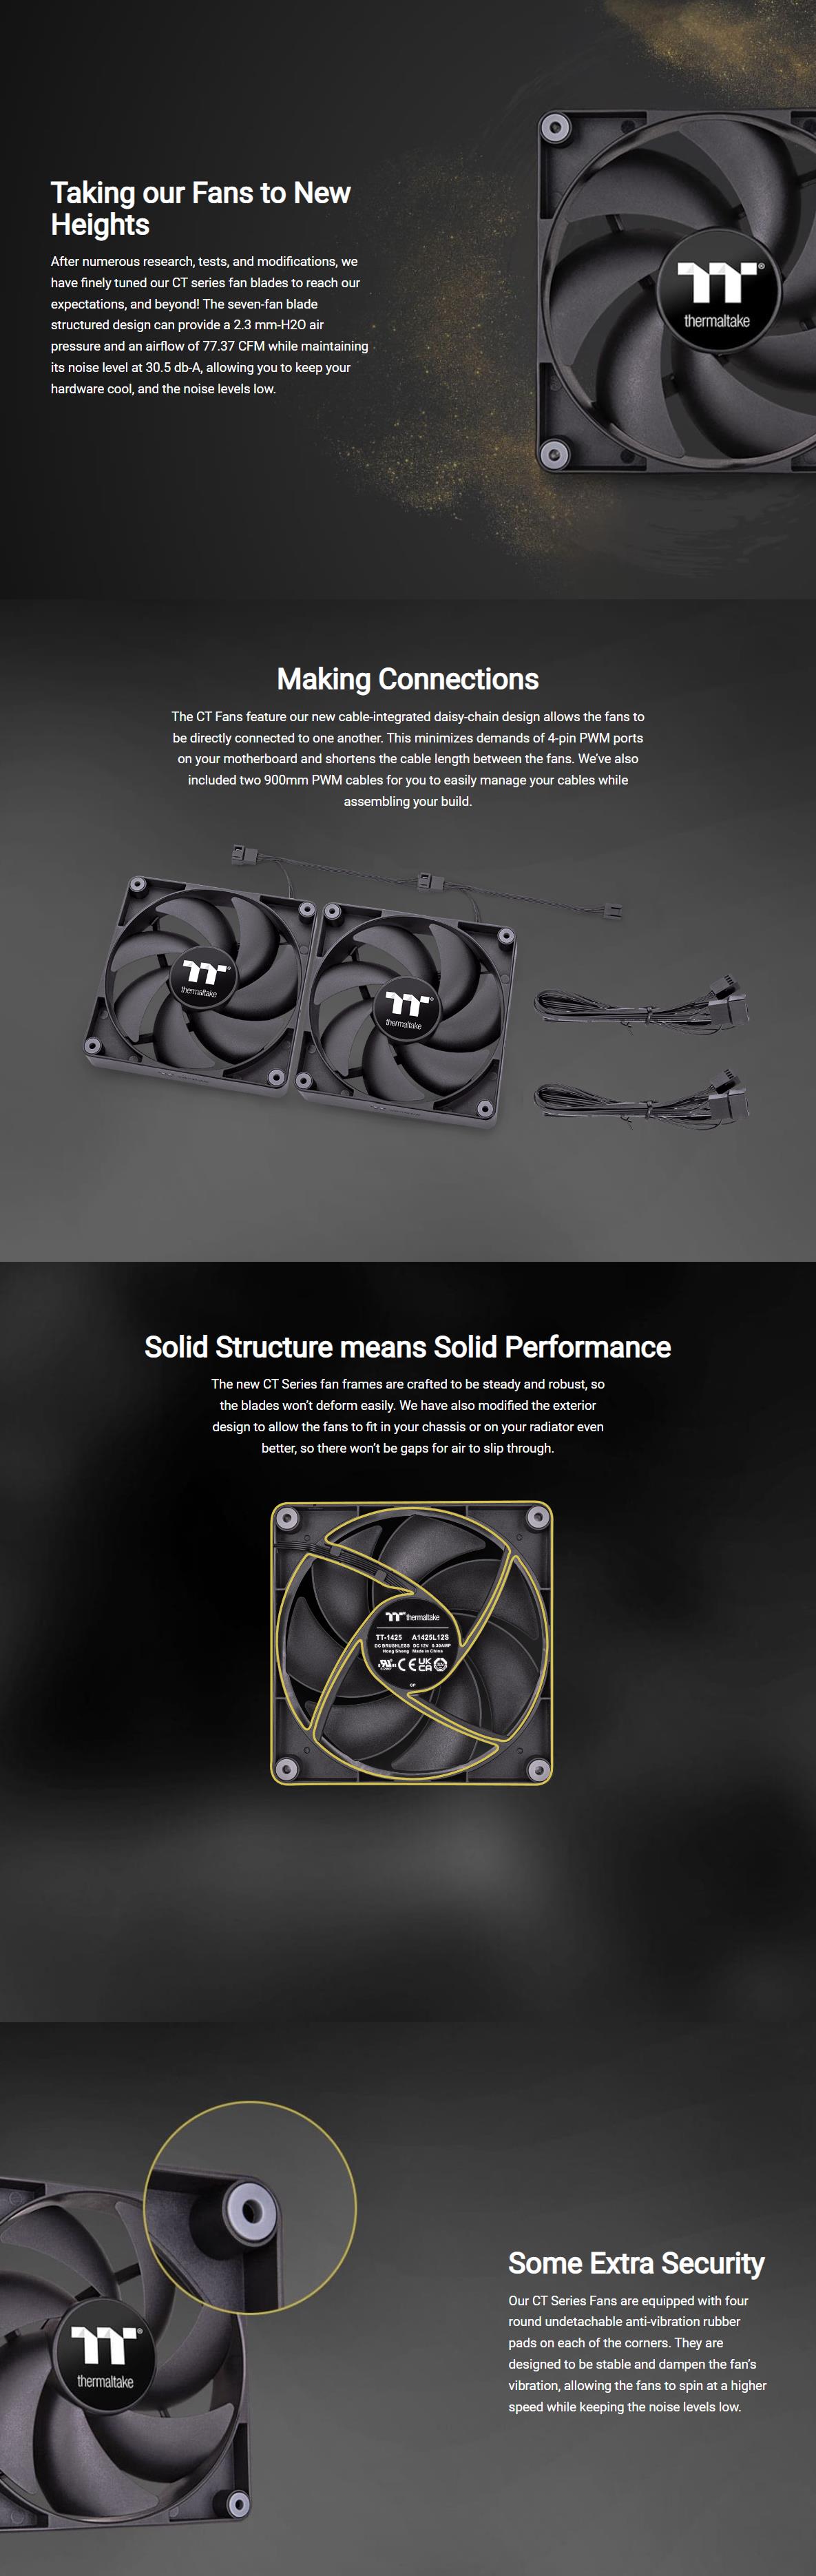 A large marketing image providing additional information about the product Thermaltake CT140 - 140mm PWM Cooling Fan (2 Pack) - Additional alt info not provided